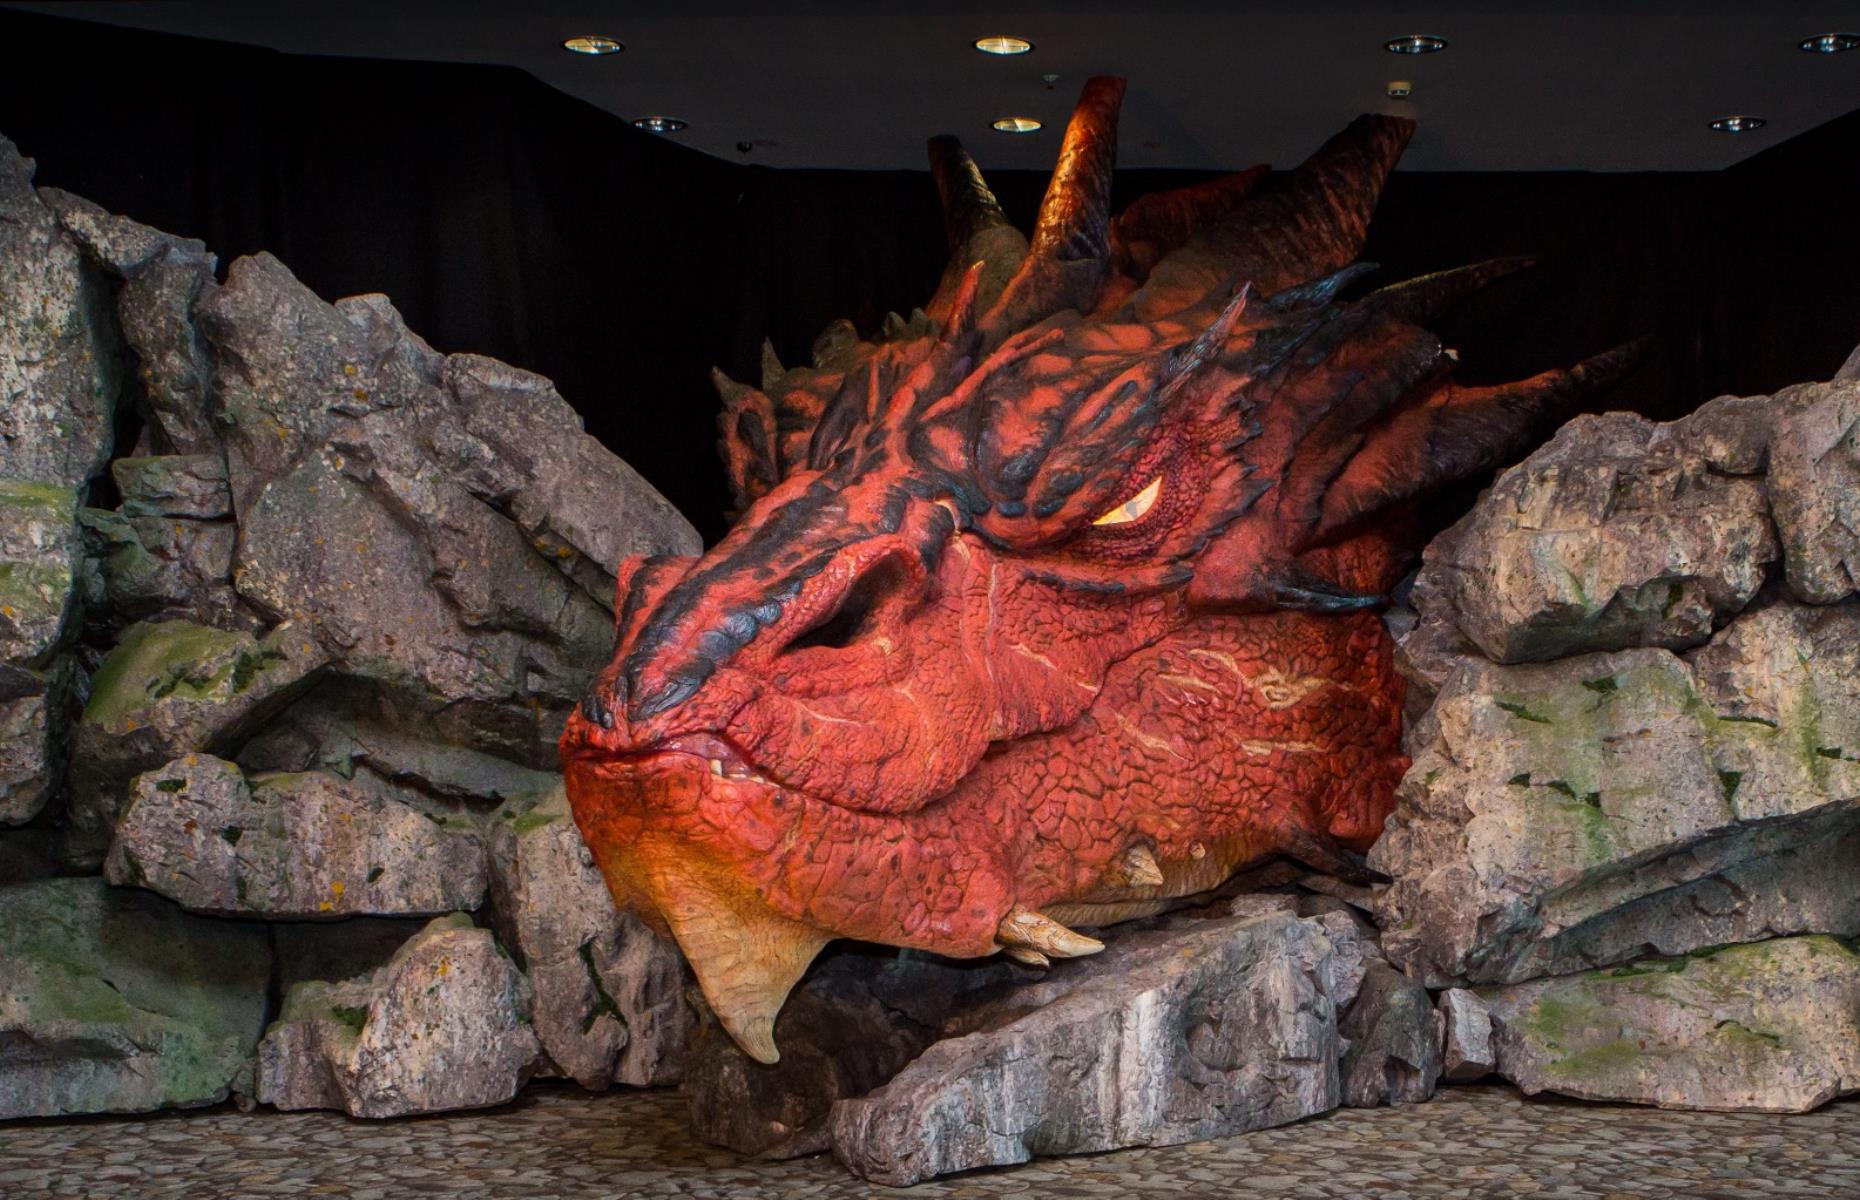 <p>Enter Wellington’s main international terminal and you’ll be greeted by a fearsome dragon. An enormous model of Smaug the Magnificent from local film director Peter Jackson's <em>The Hobbit </em>series is hidden away in a rocky facade, keeping a beady eye on passengers as they check in.</p>  <p><strong><a href="http://www.loveexploring.com/galleries/75150/the-strangest-things-youll-find-in-airports">Discover even m</a><a href="https://www.loveexploring.com/galleries/75150/the-strangest-things-youll-find-in-airports">ore unusual things you'll find in airports</a></strong></p>